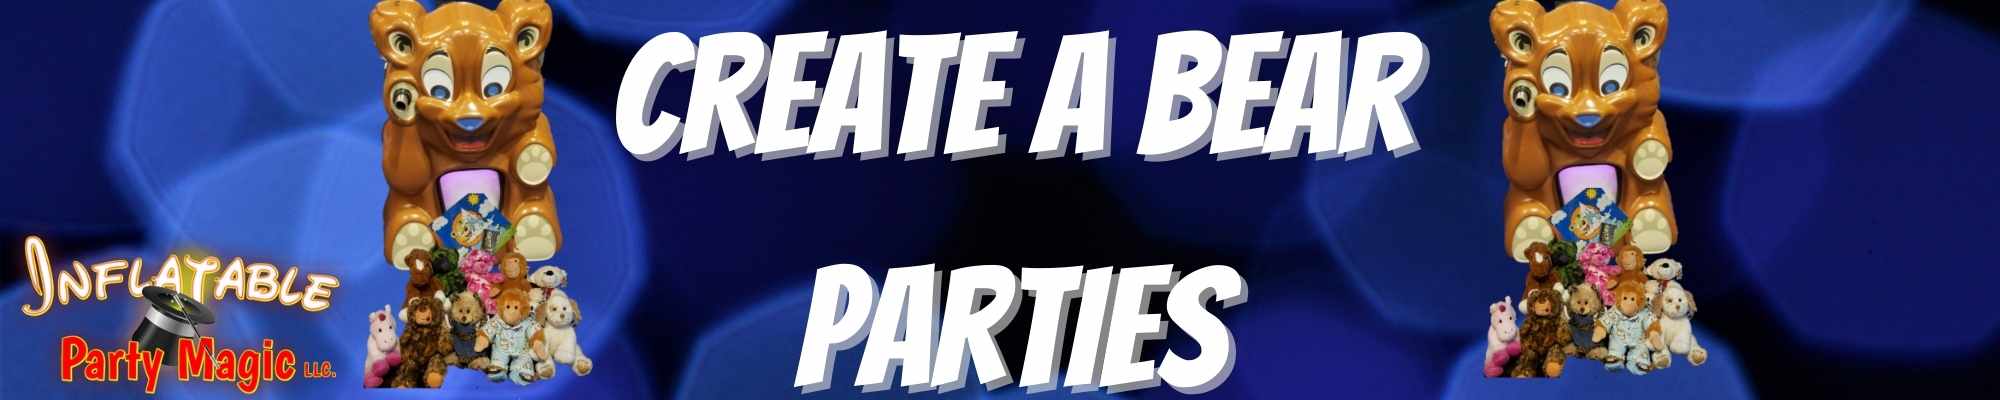 Create Your Own Bear Parties